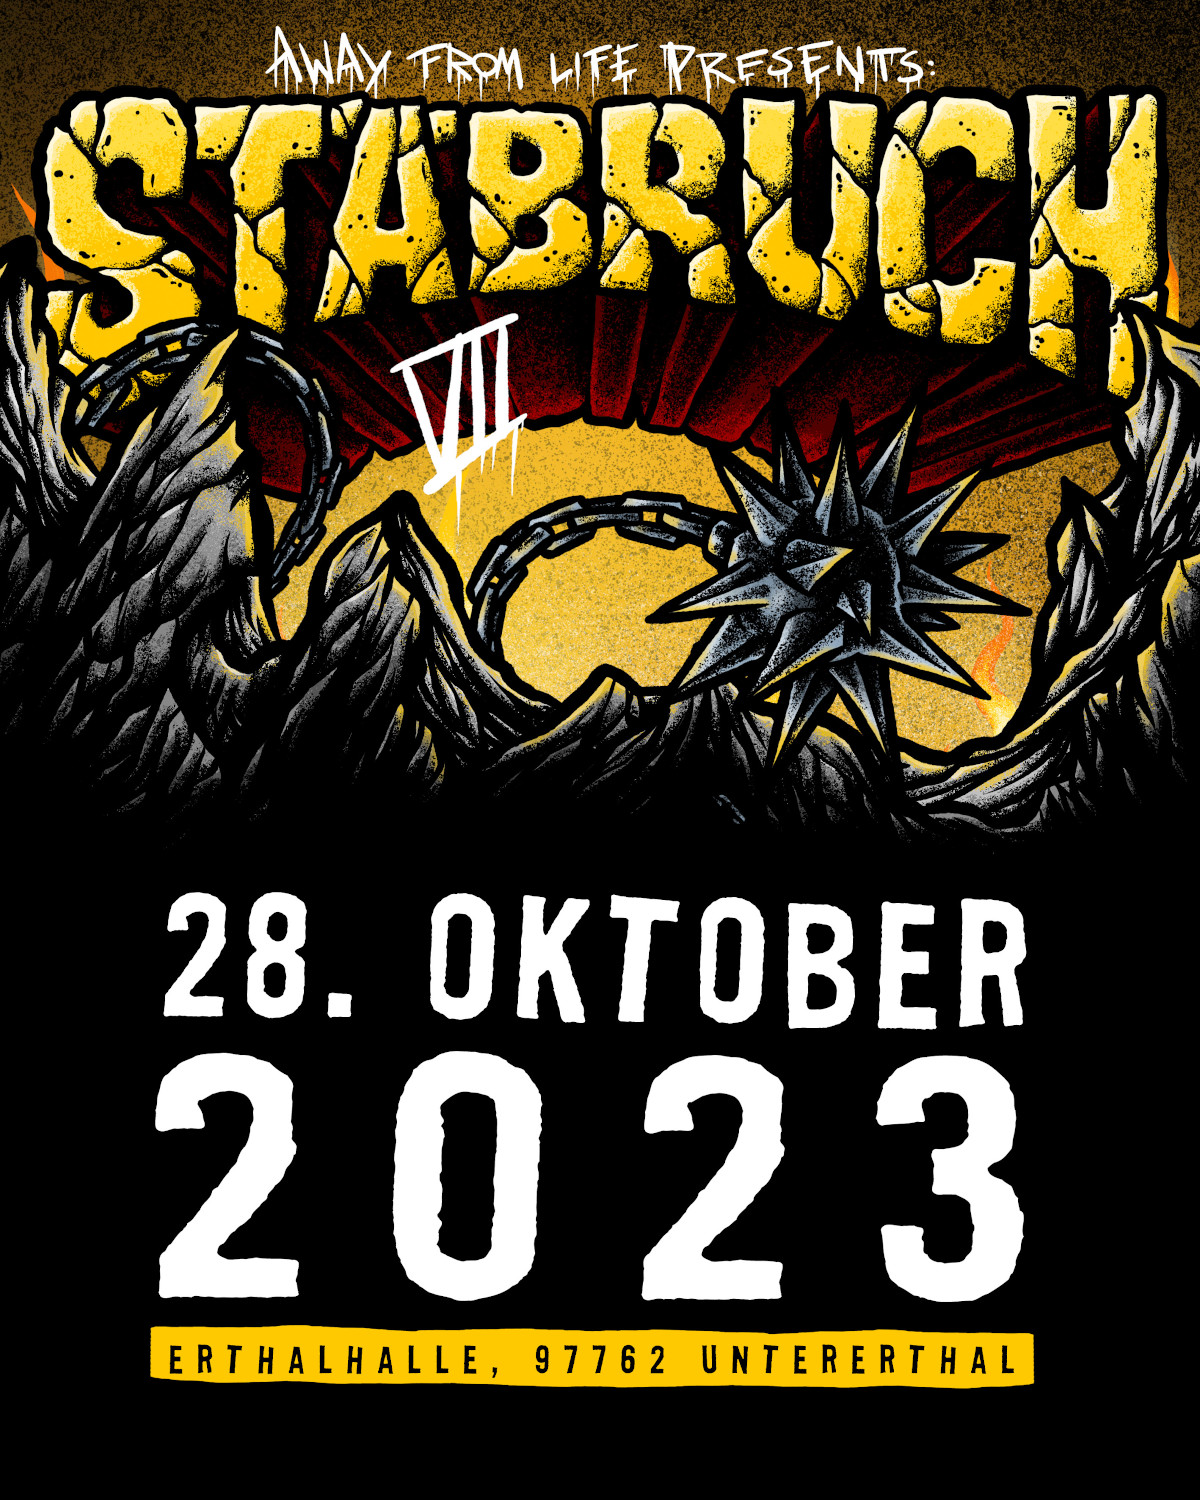 Stäbruch 2023 - Save The Date